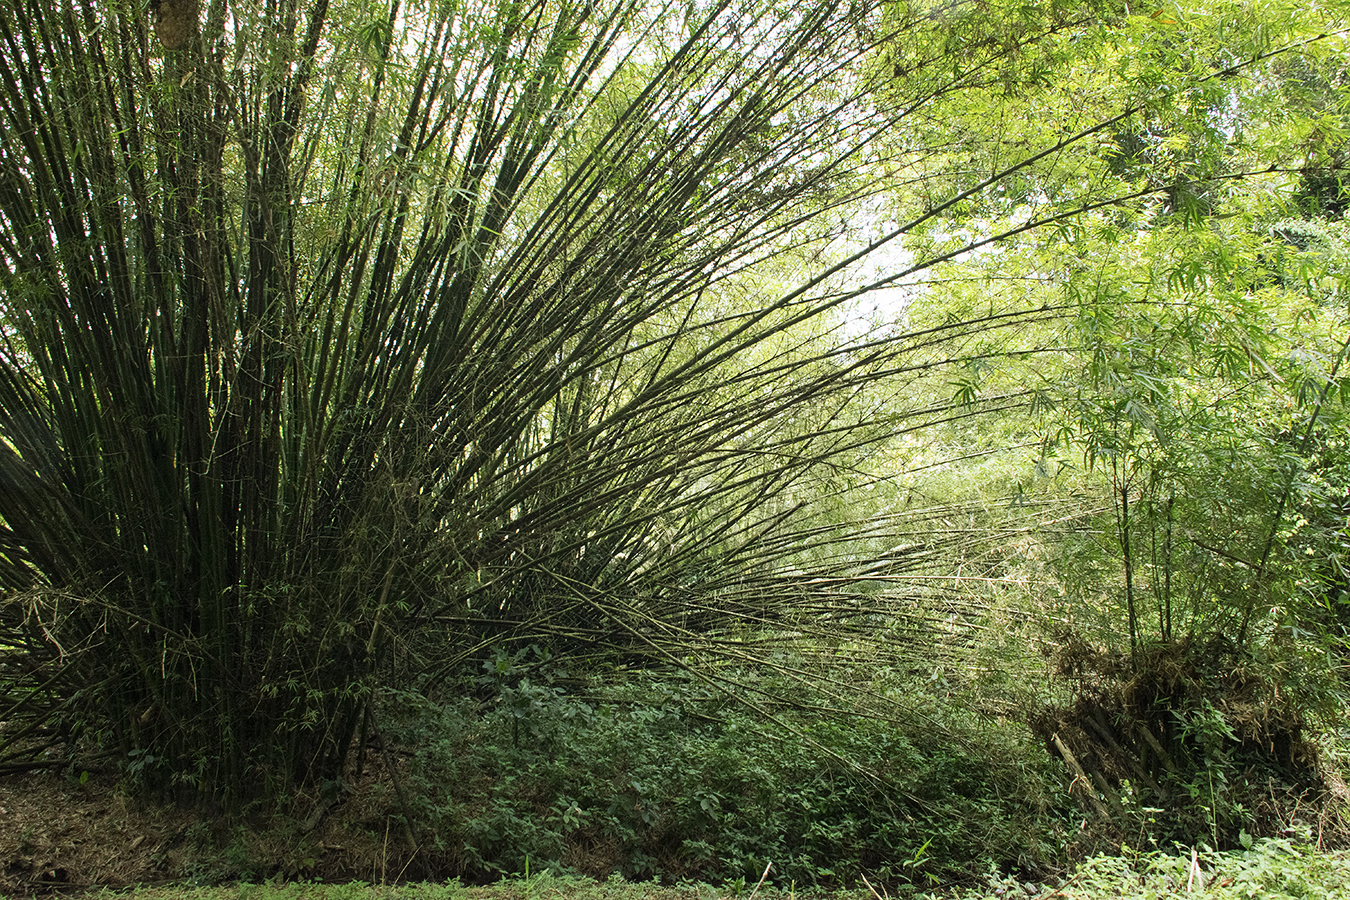 Renee_ChinLee_Trinidad_bamboo_forest